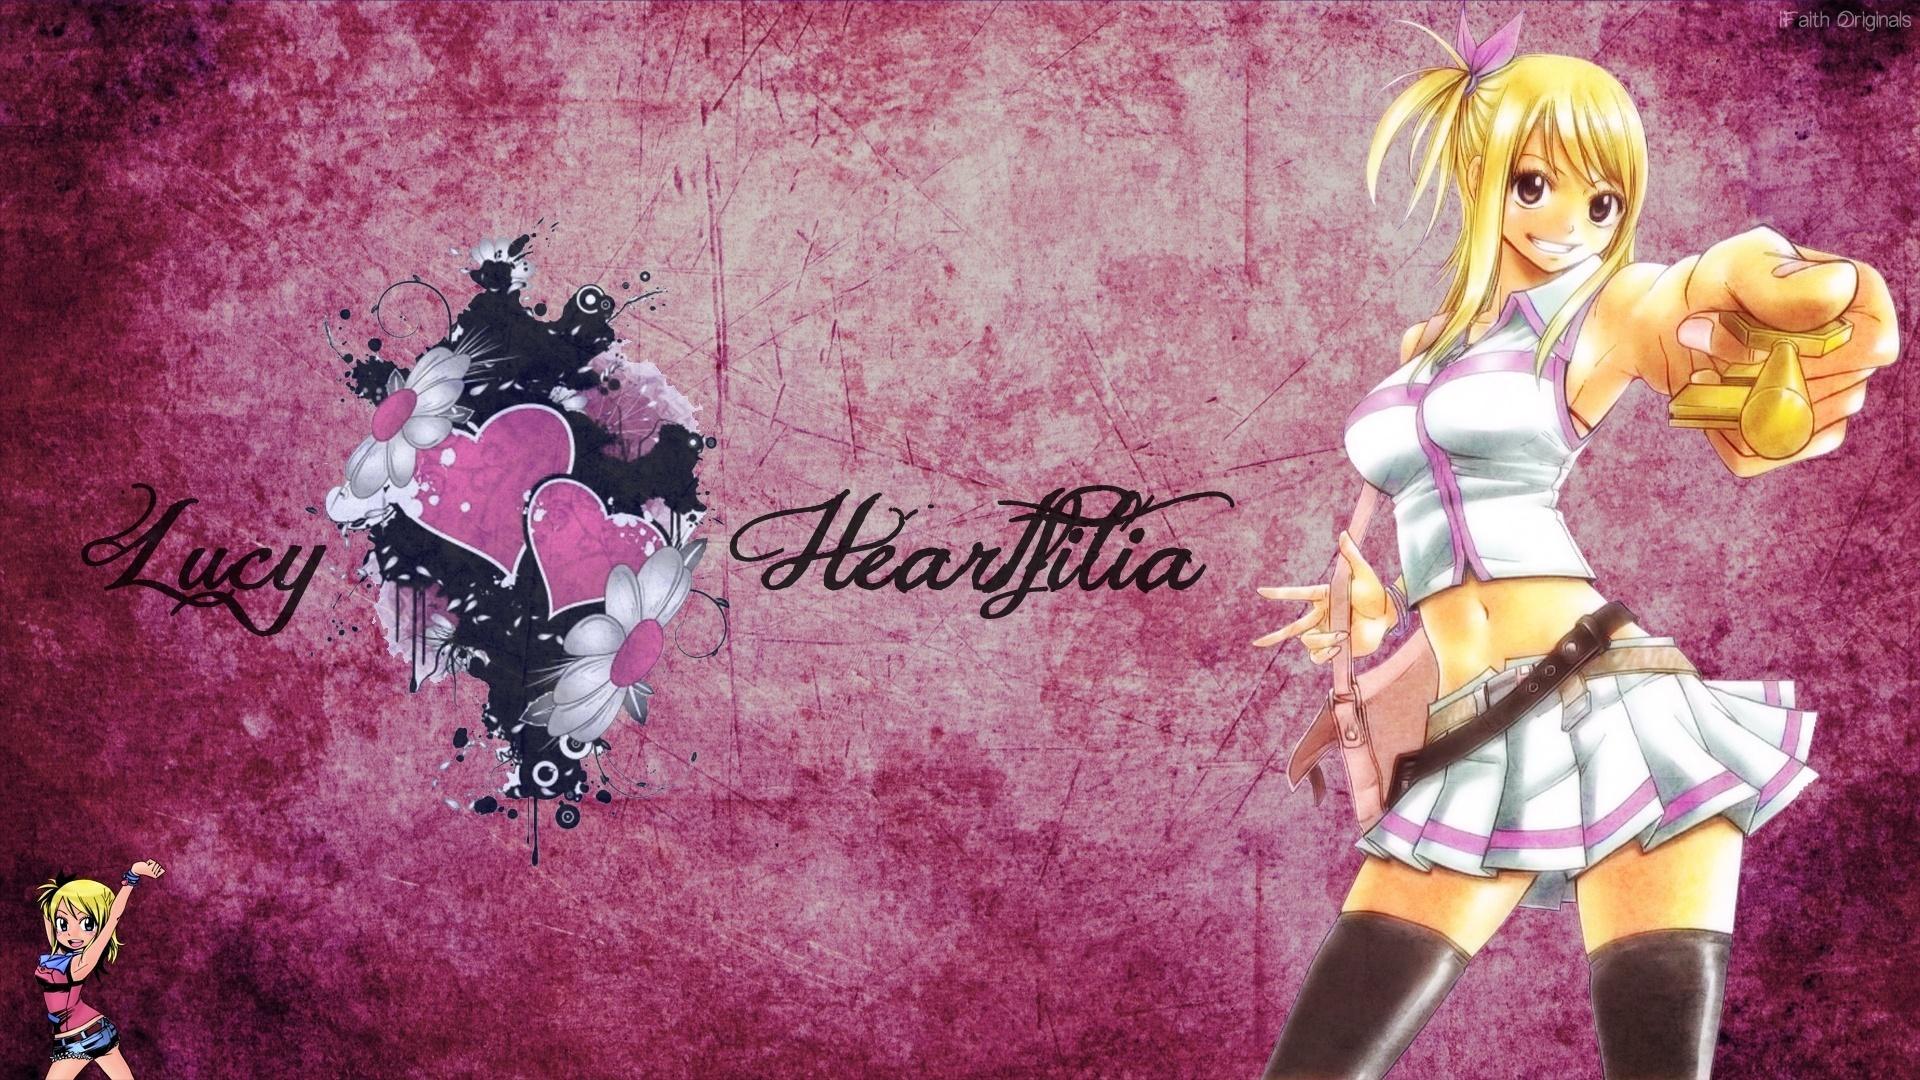 Fairy Tail, Lucy Heartfilia Wallpaper and Picture